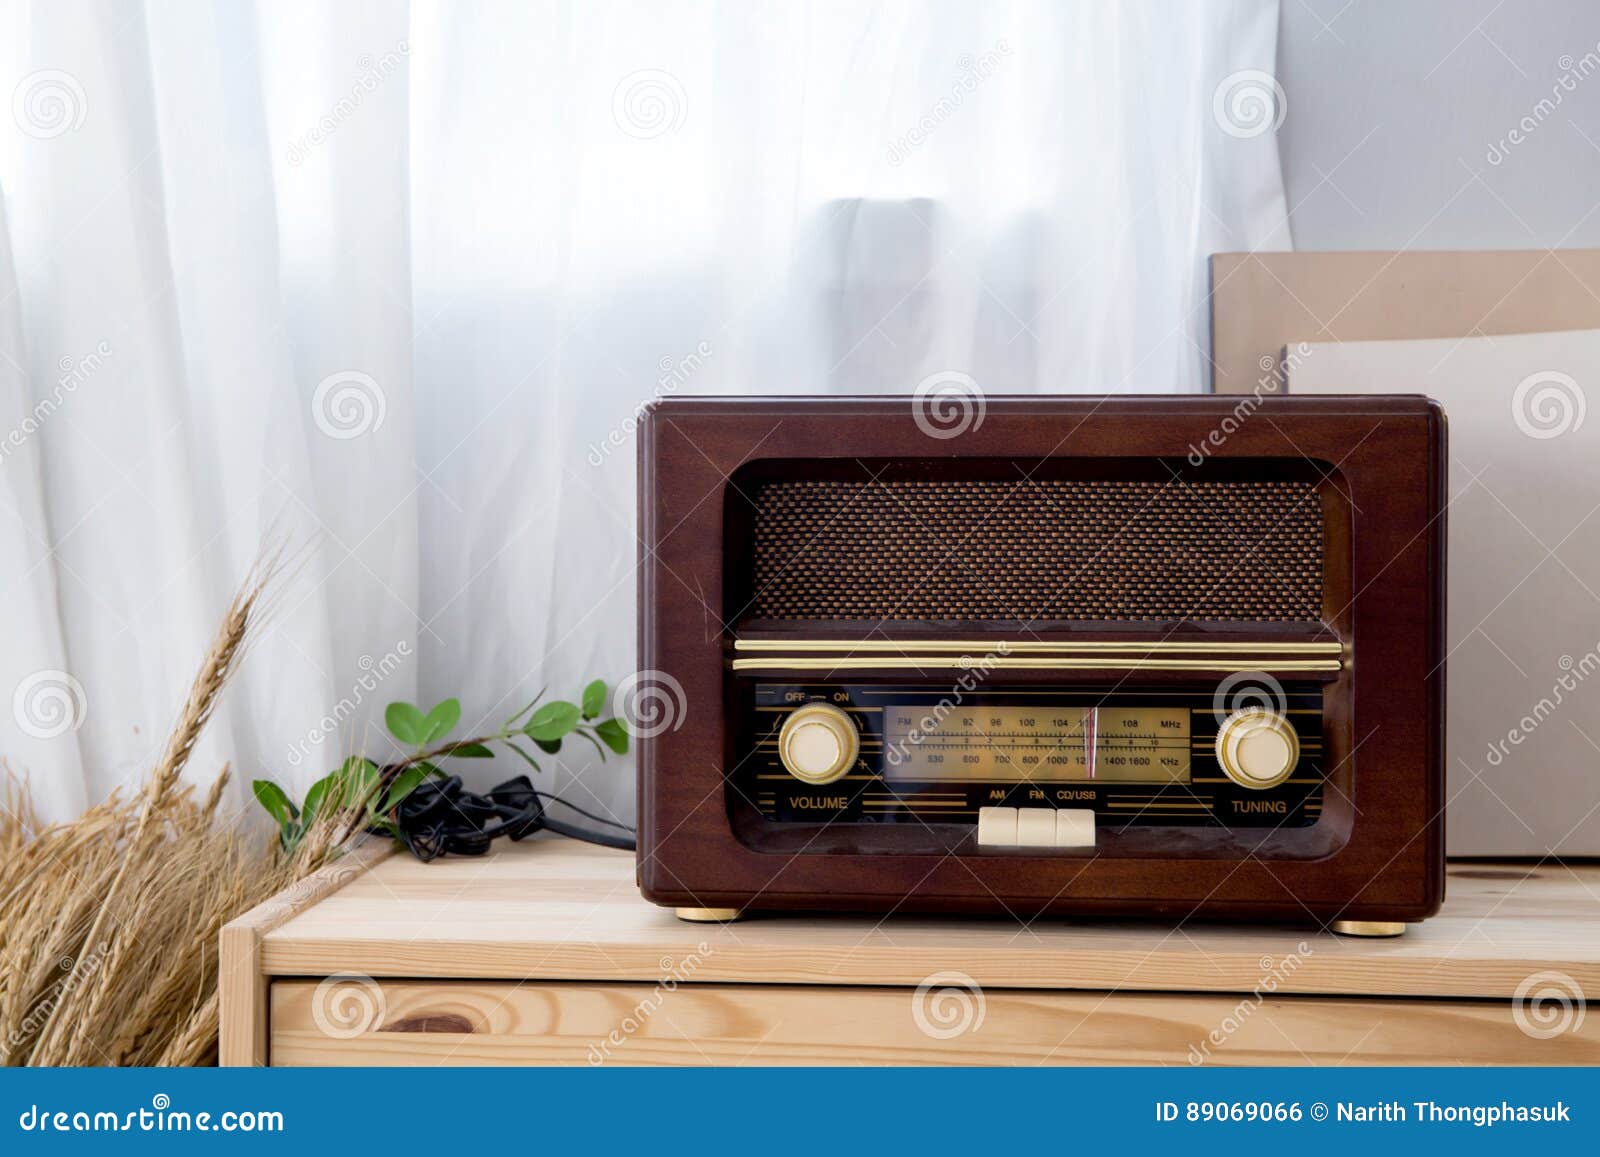 Vintage Radio With Shelf On The Wooden Cabinet Stock Photo Image